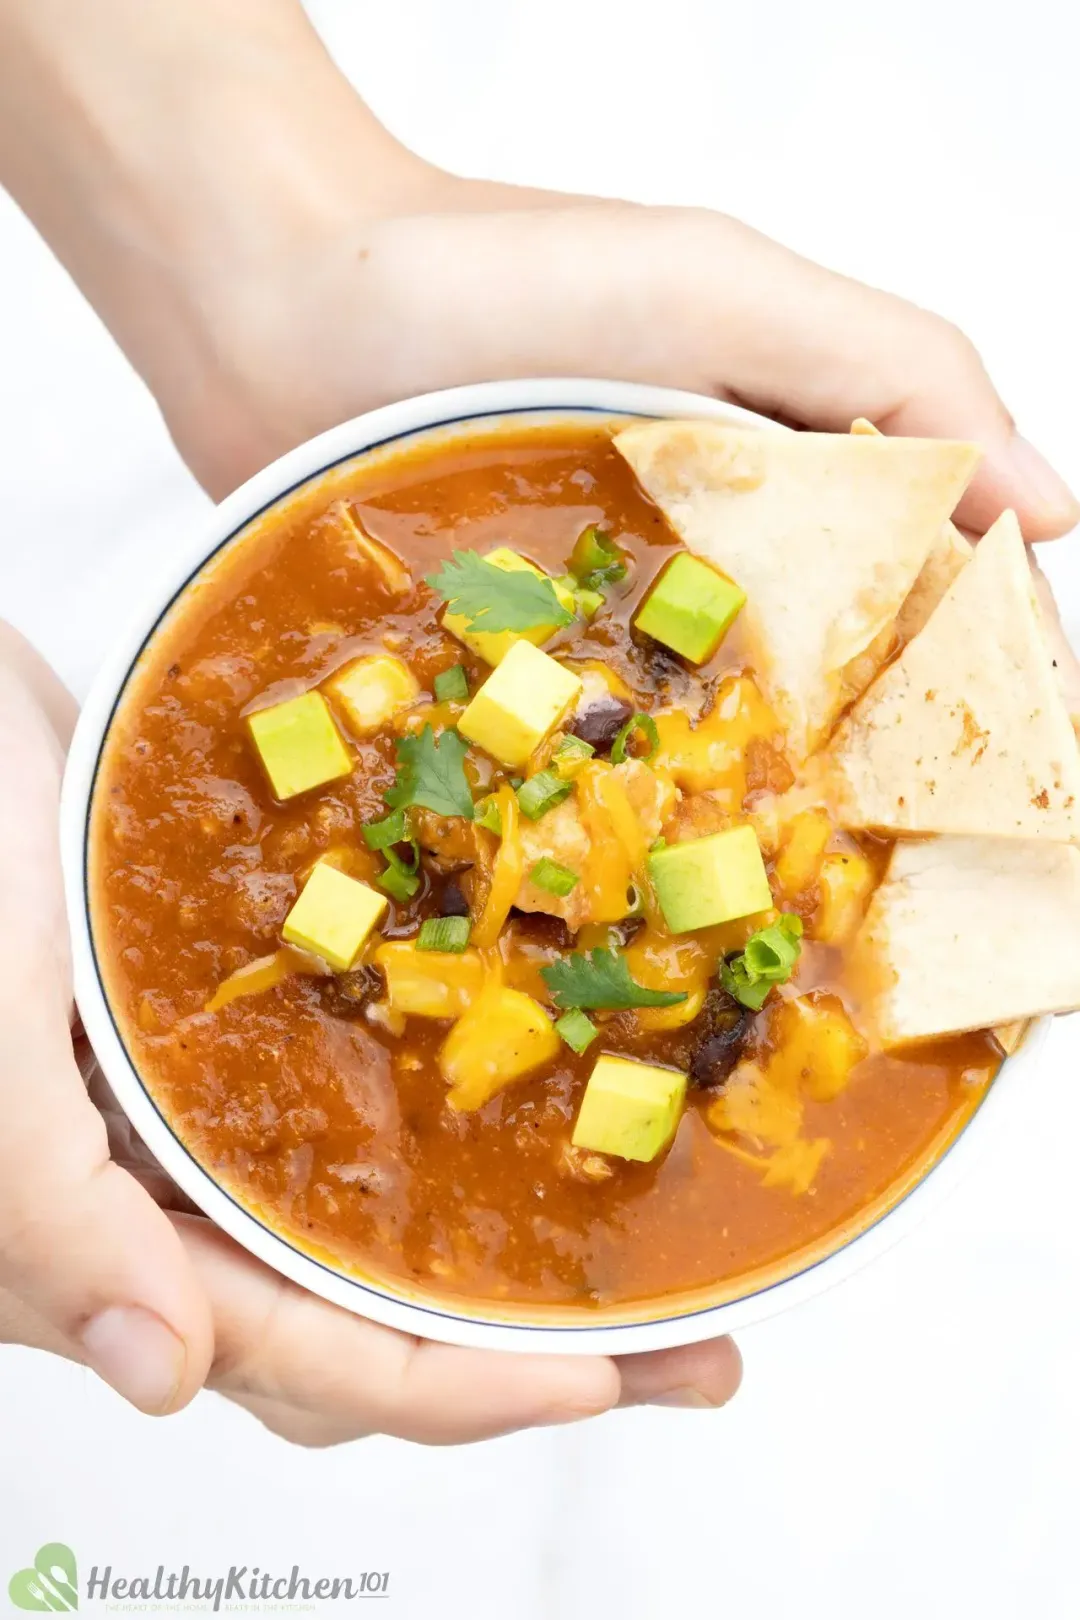 Two hands holding a bowl of chicken tortilla soup topped with zucchini cubes, shredded cheese and tortilla chips